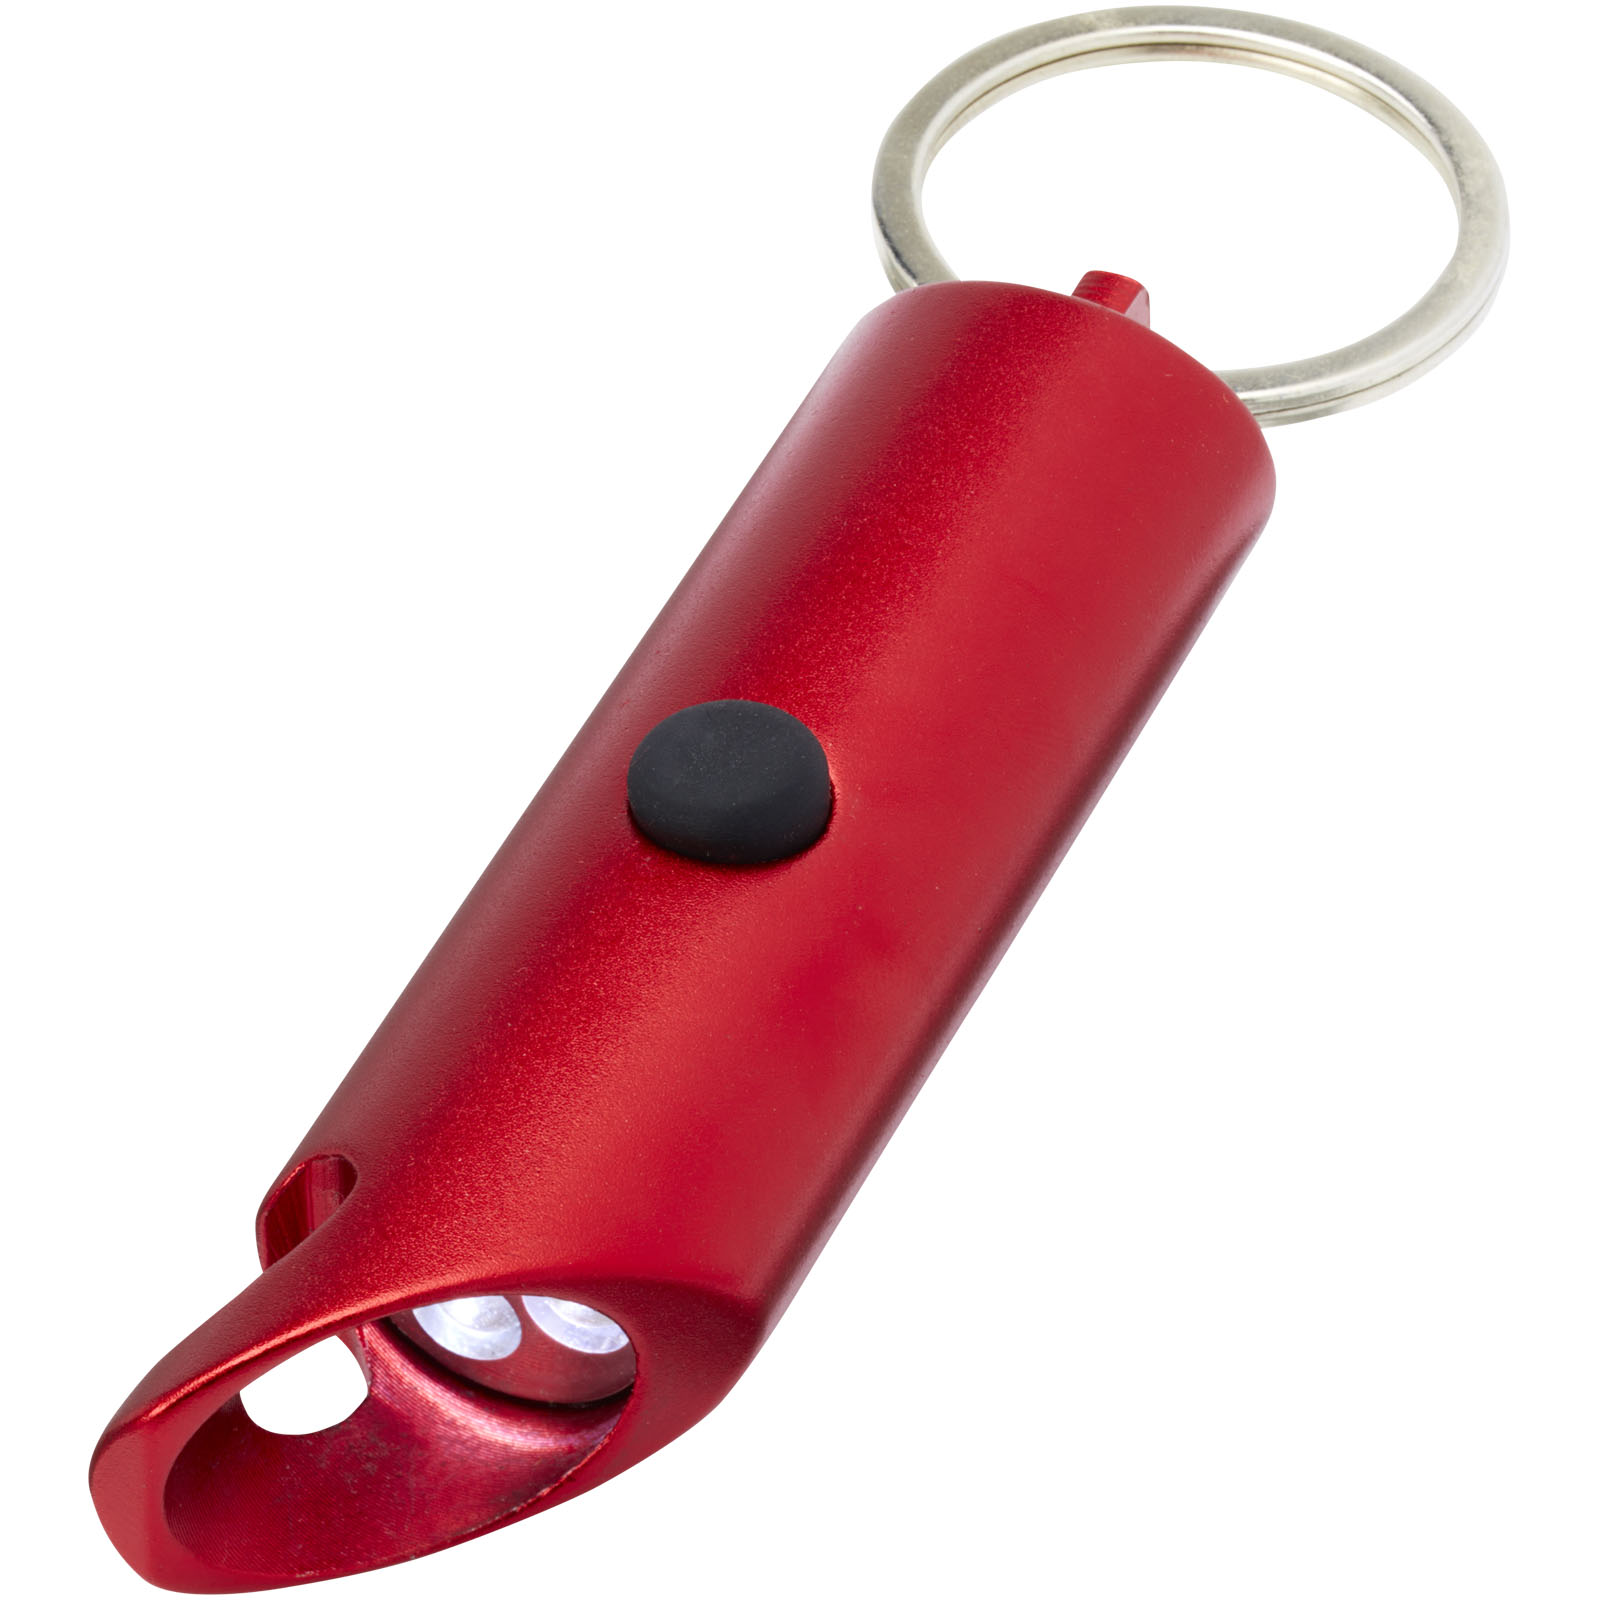 Advertising Lamps - Flare RCS recycled aluminium IPX LED light and bottle opener with keychain - 0